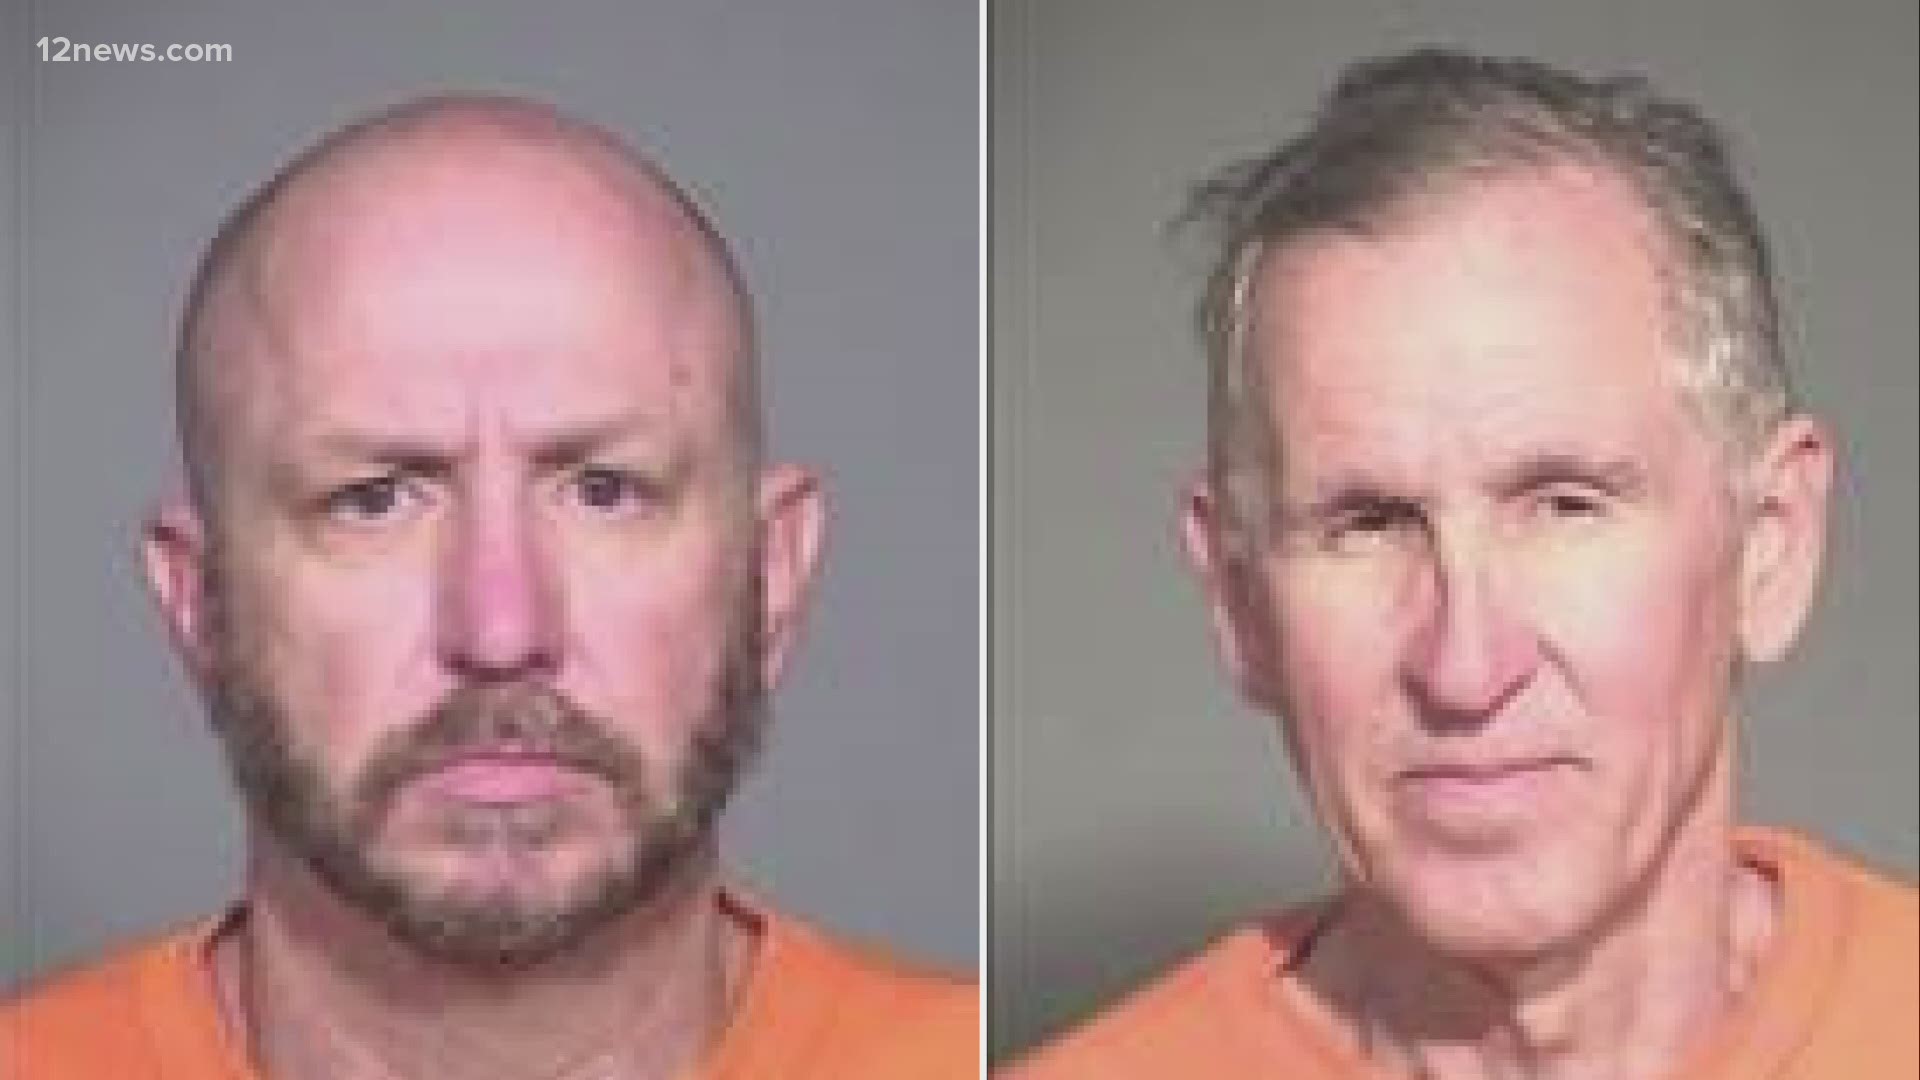 Search continues for 2 inmates who escaped from Arizona state prison in